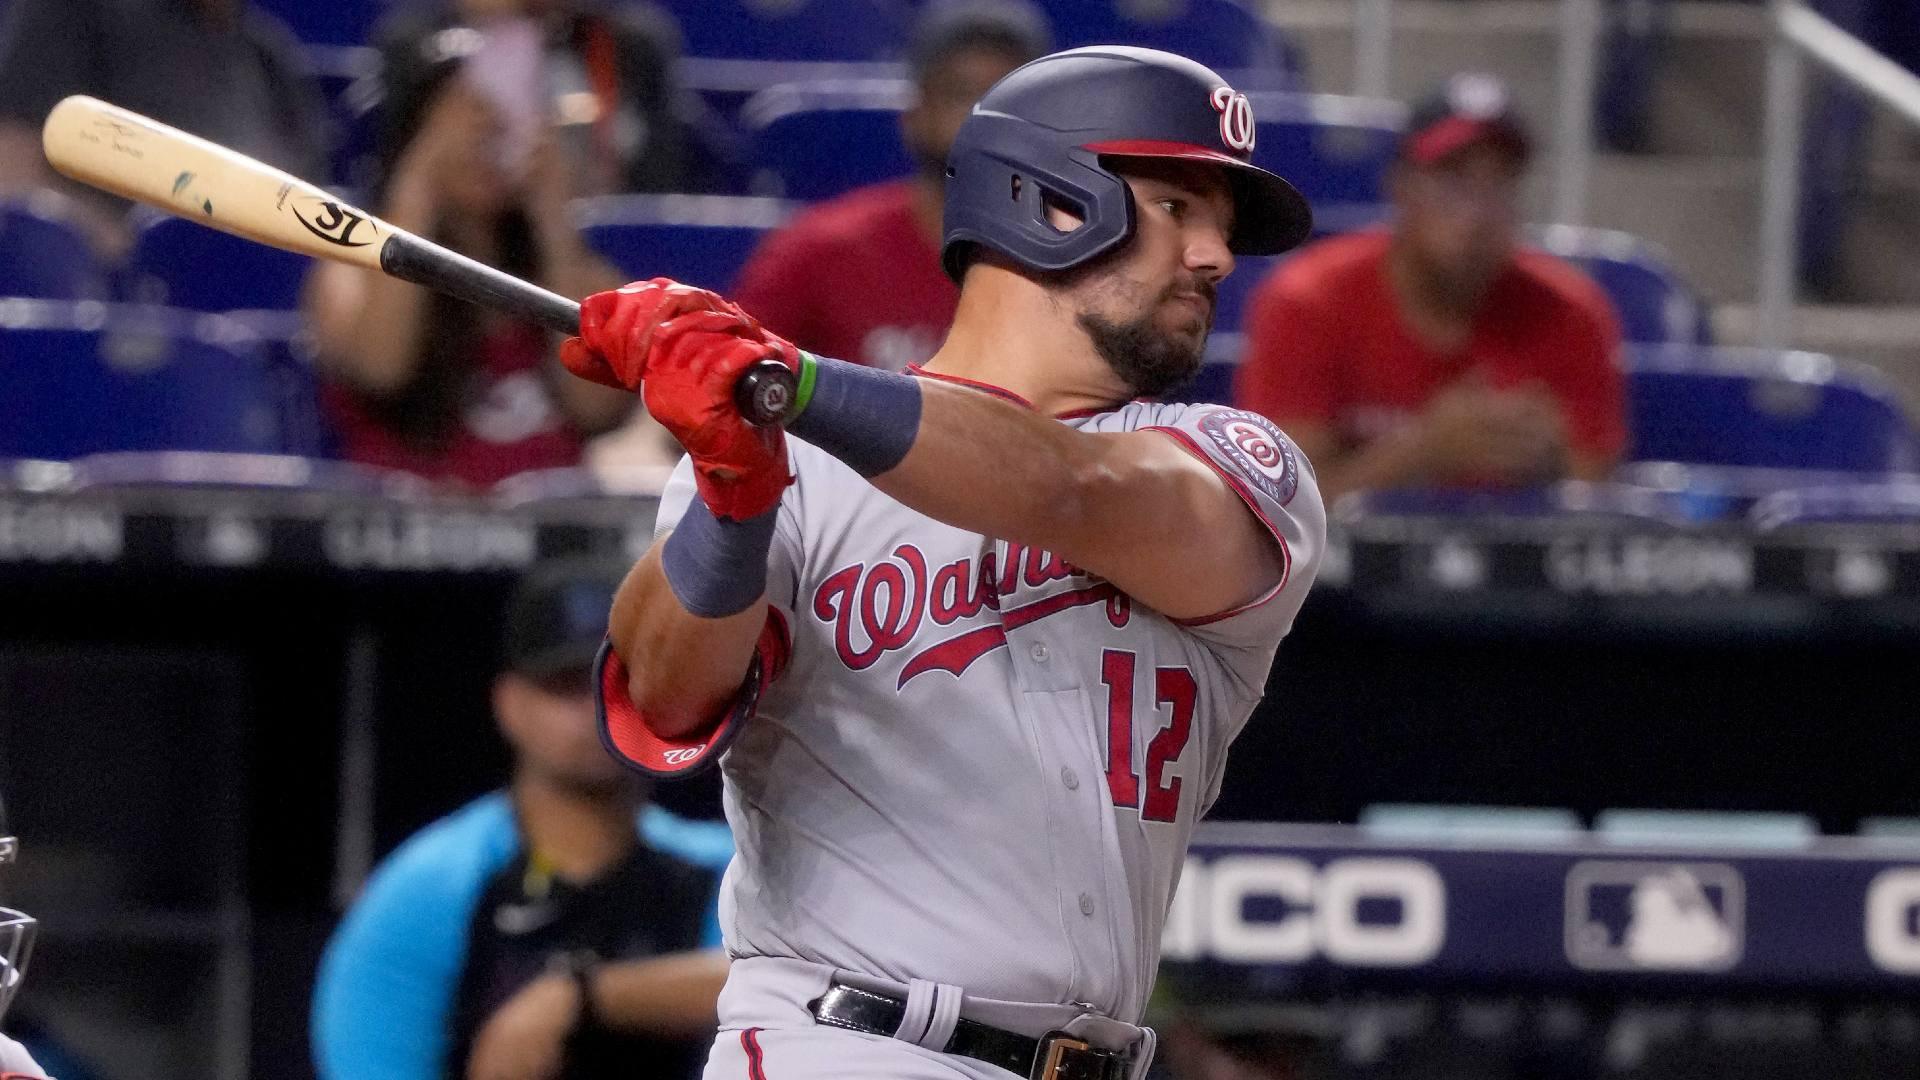 Tampa Bay Rays vs Washington Nationals Preview (June 29): Schwarber Is Fueling Washington’s Surge But Rays Have Knack for Limiting Offense